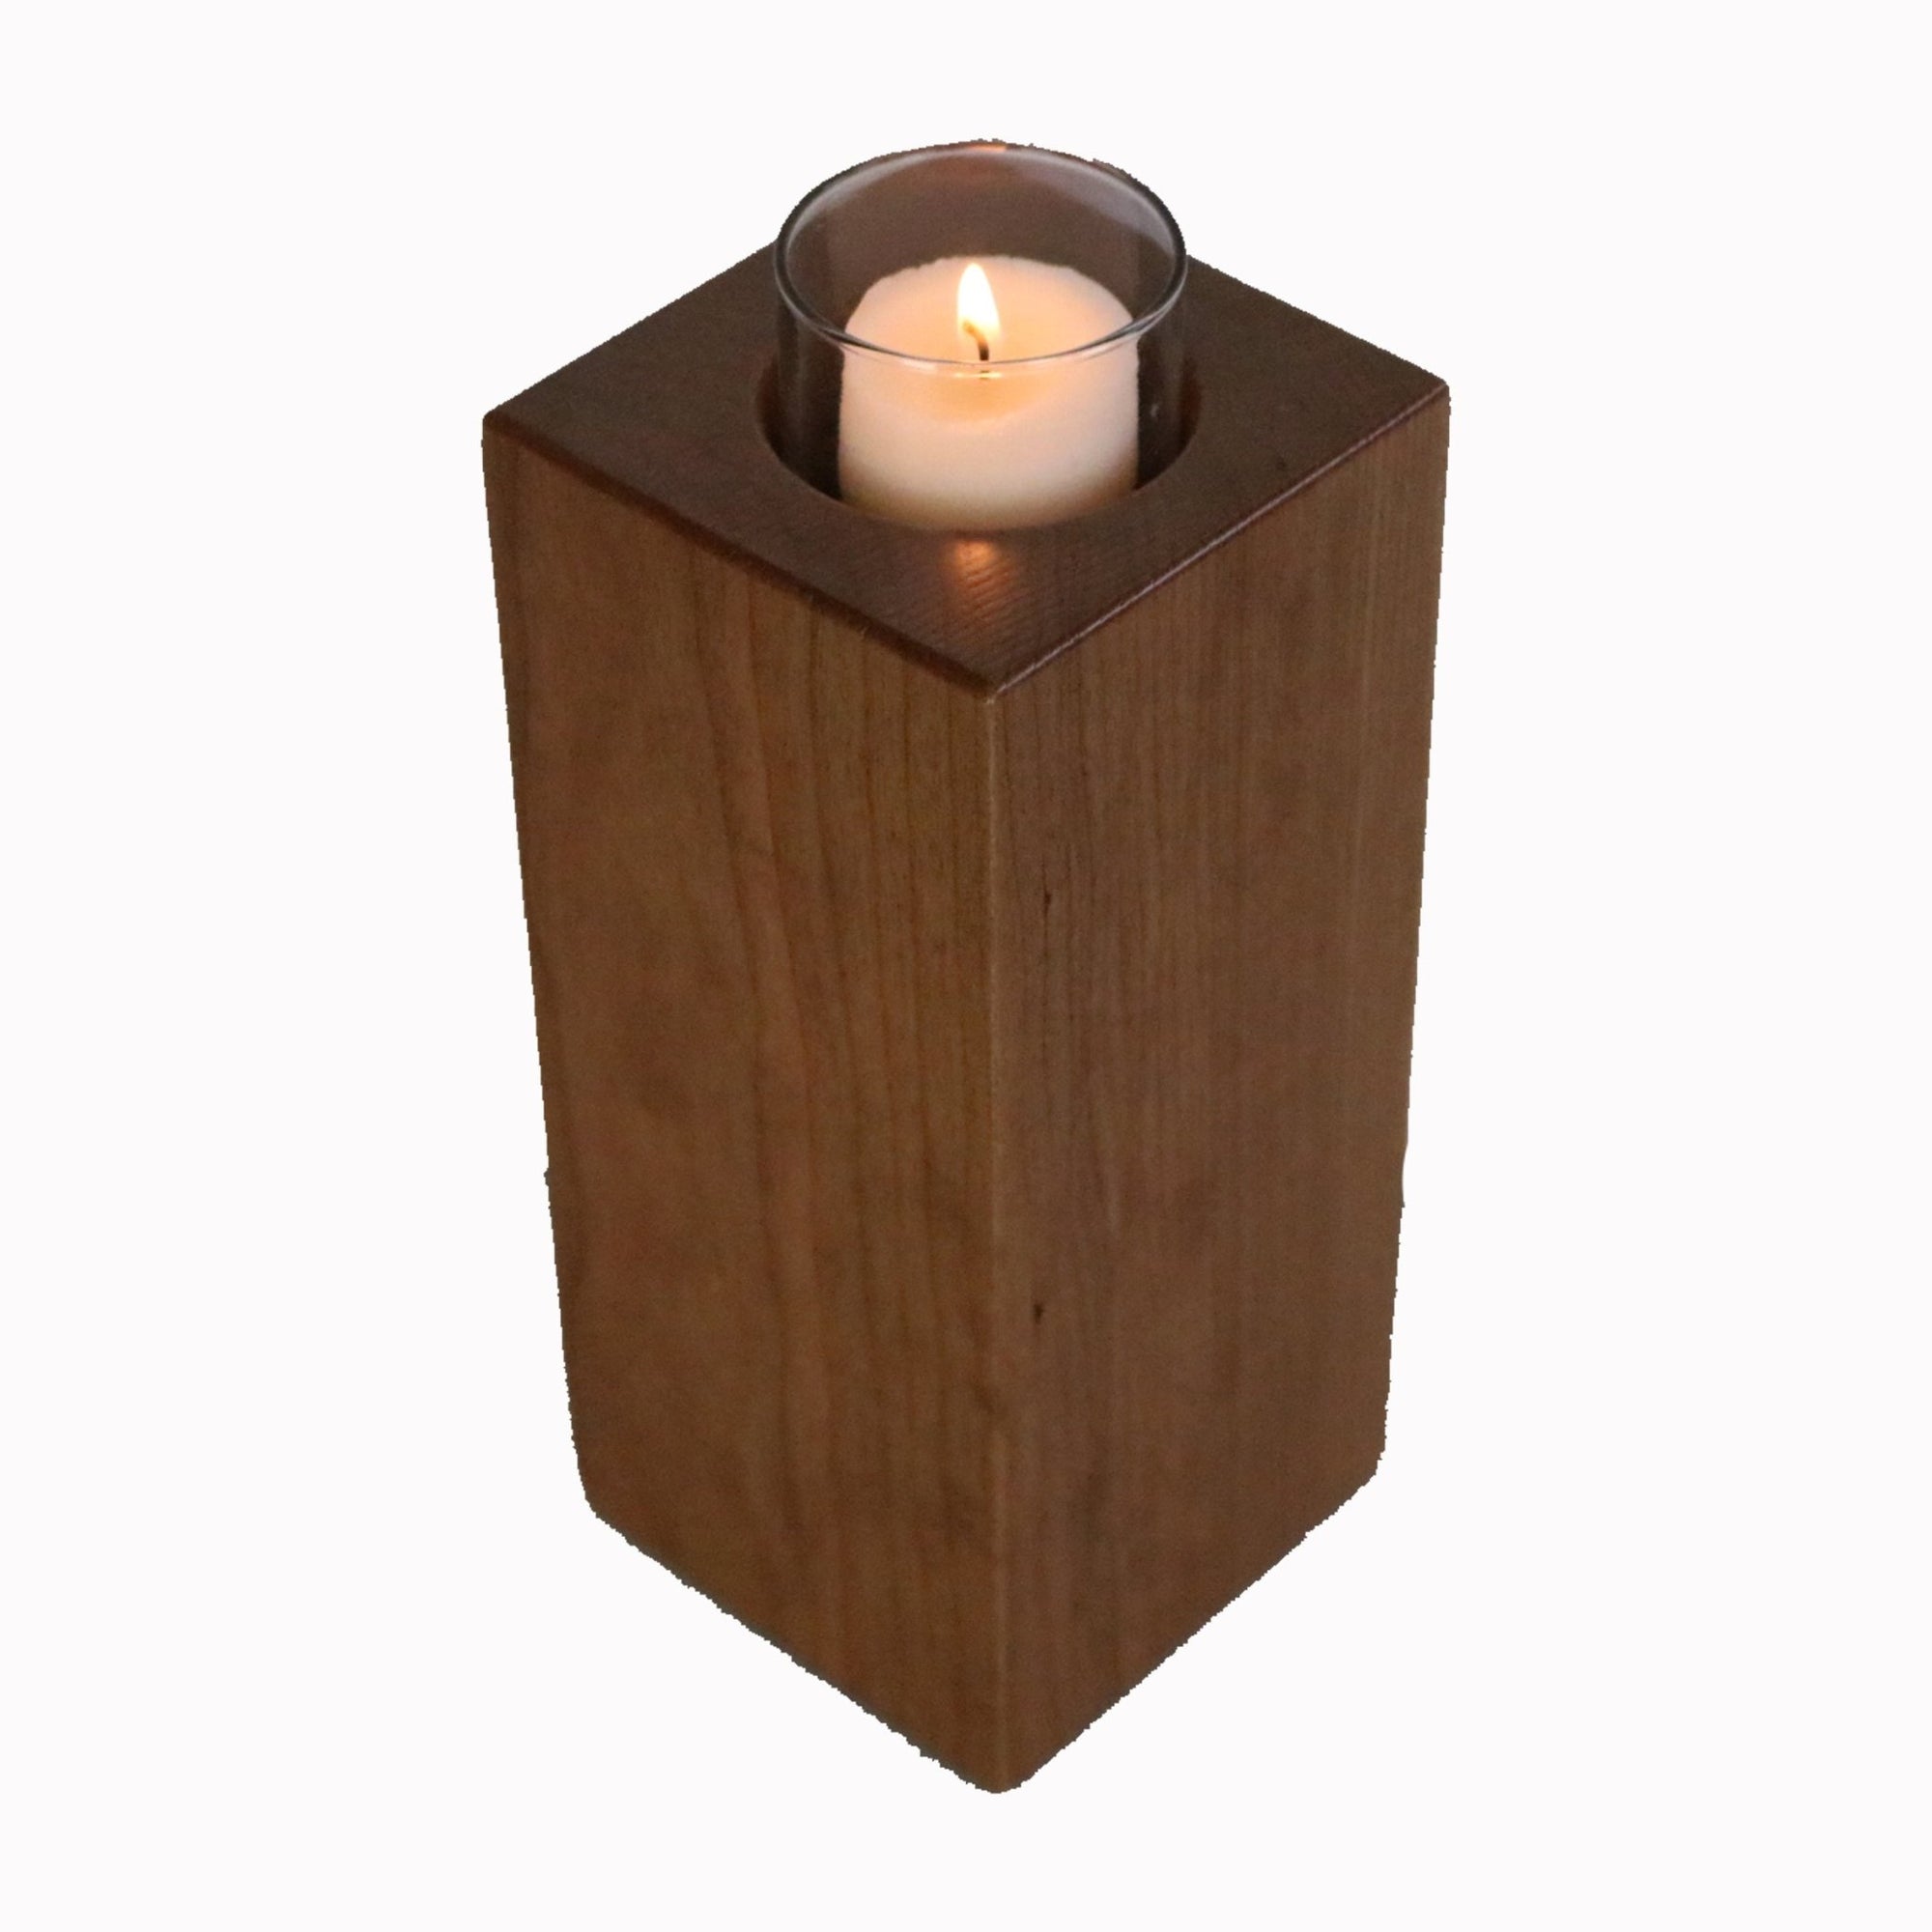 Custom Cherry Wood Single Votive Candle Holder If Love Could - LifeSong Milestones